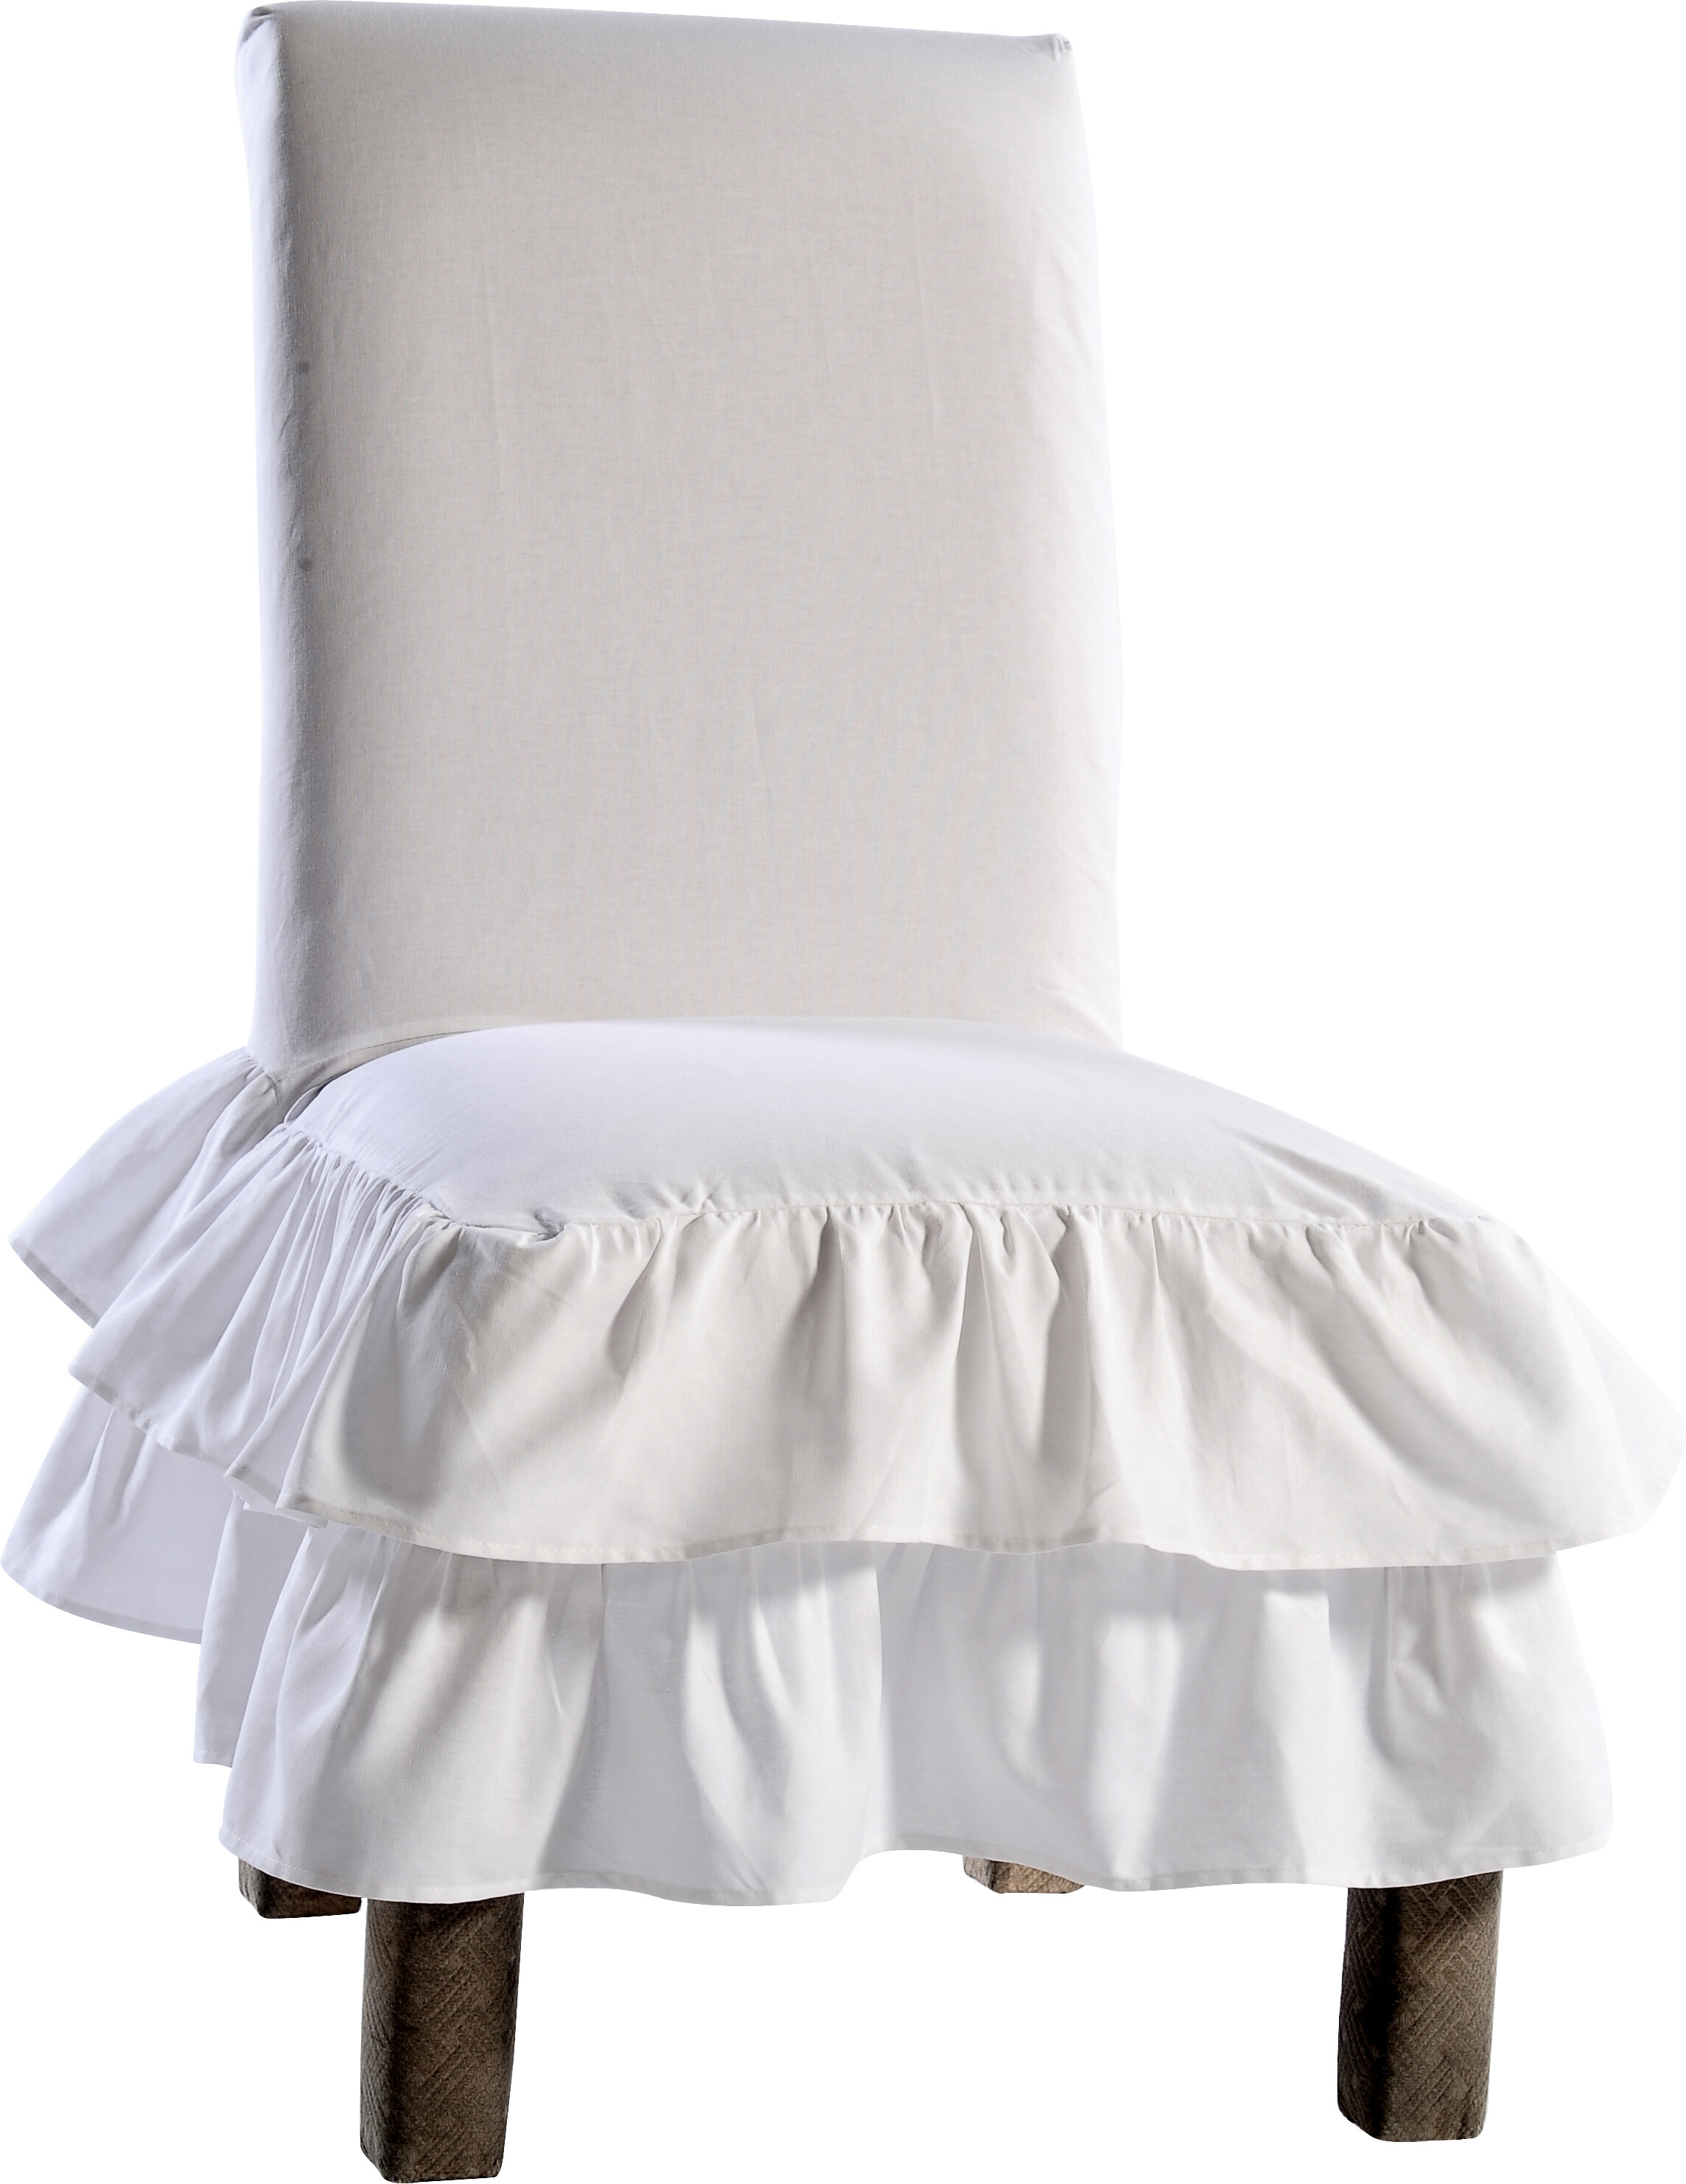 skirted dining chair covers